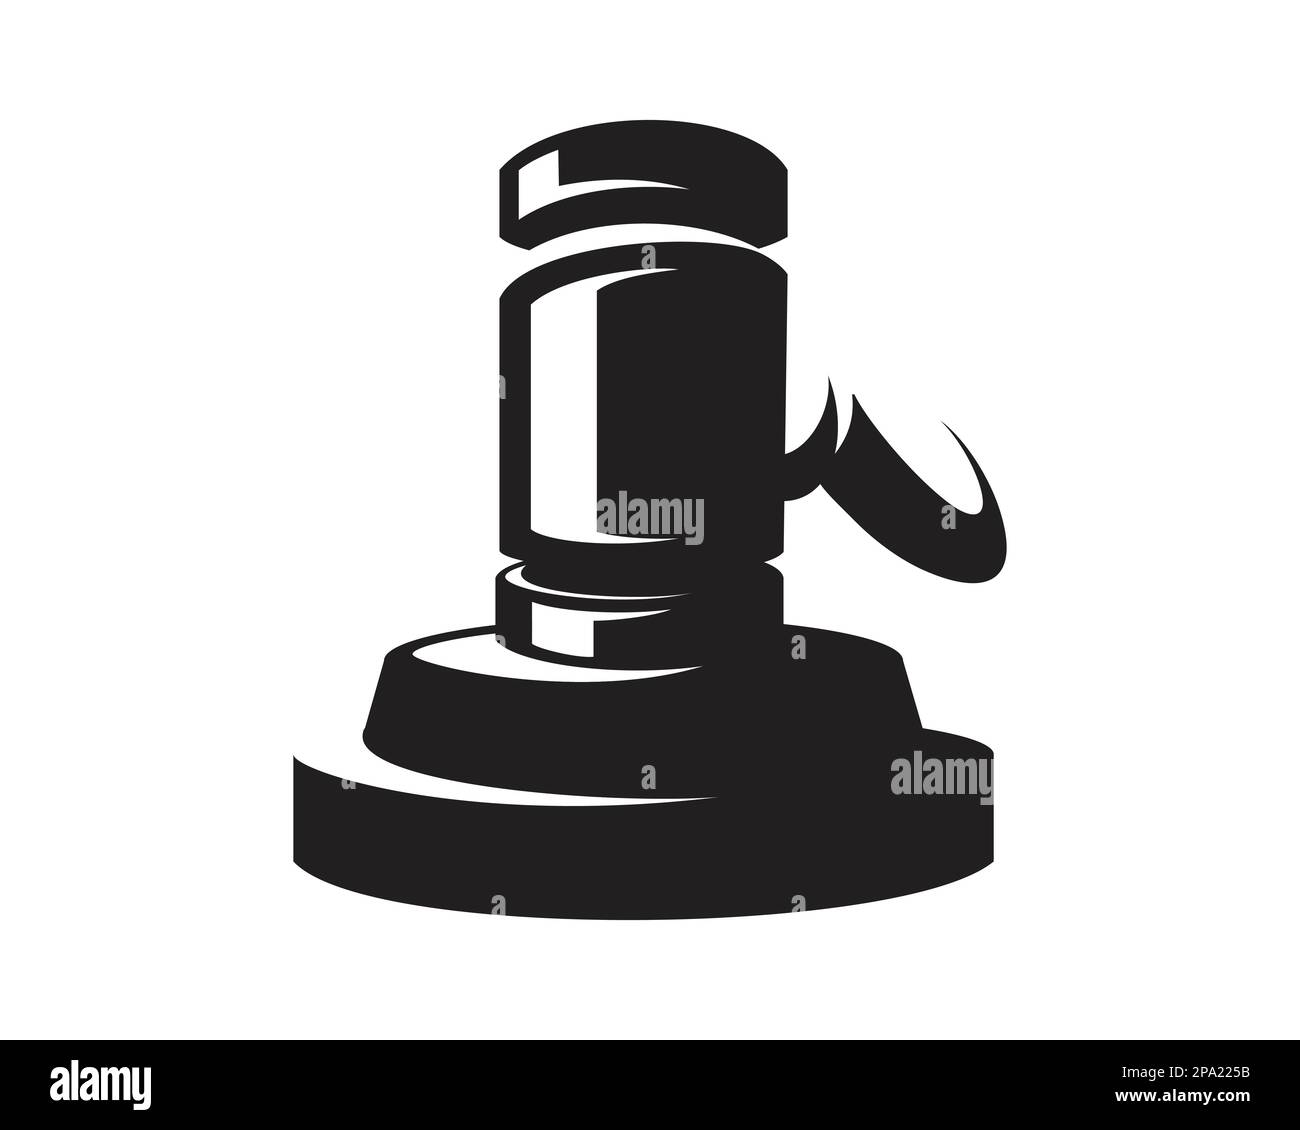 Justice Gavel Illustration as Symbolization of Justice, Verdict and Order. Visualized with Silhouette Style Stock Vector